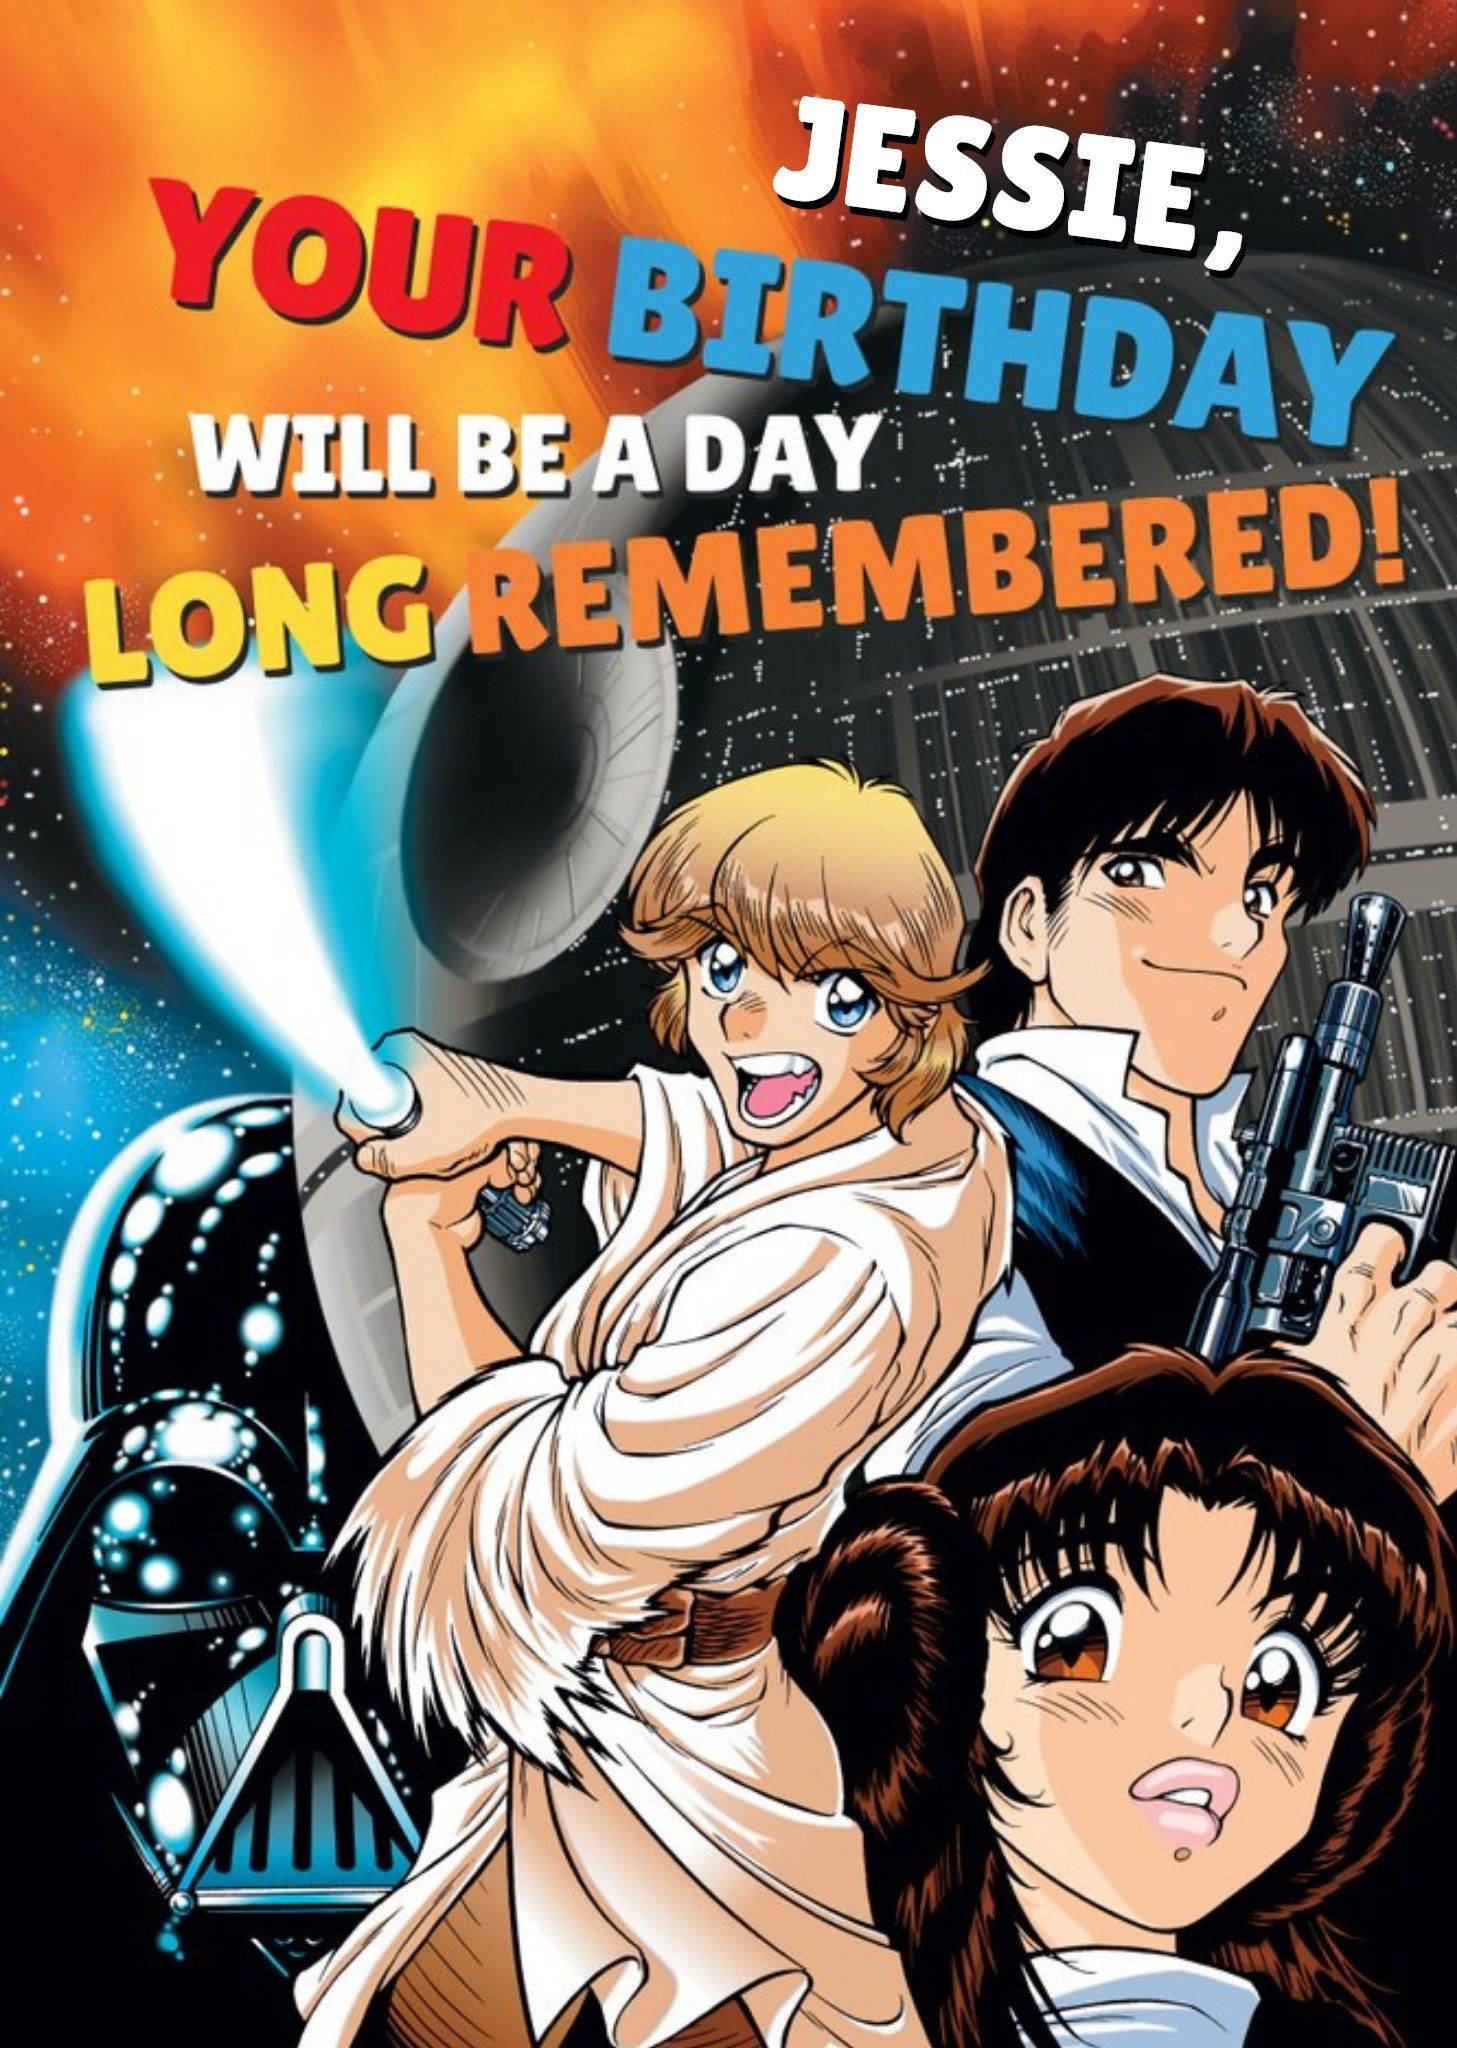 Manga Star Wars Illustrated A Day Long Remembered Birthday Card, Large